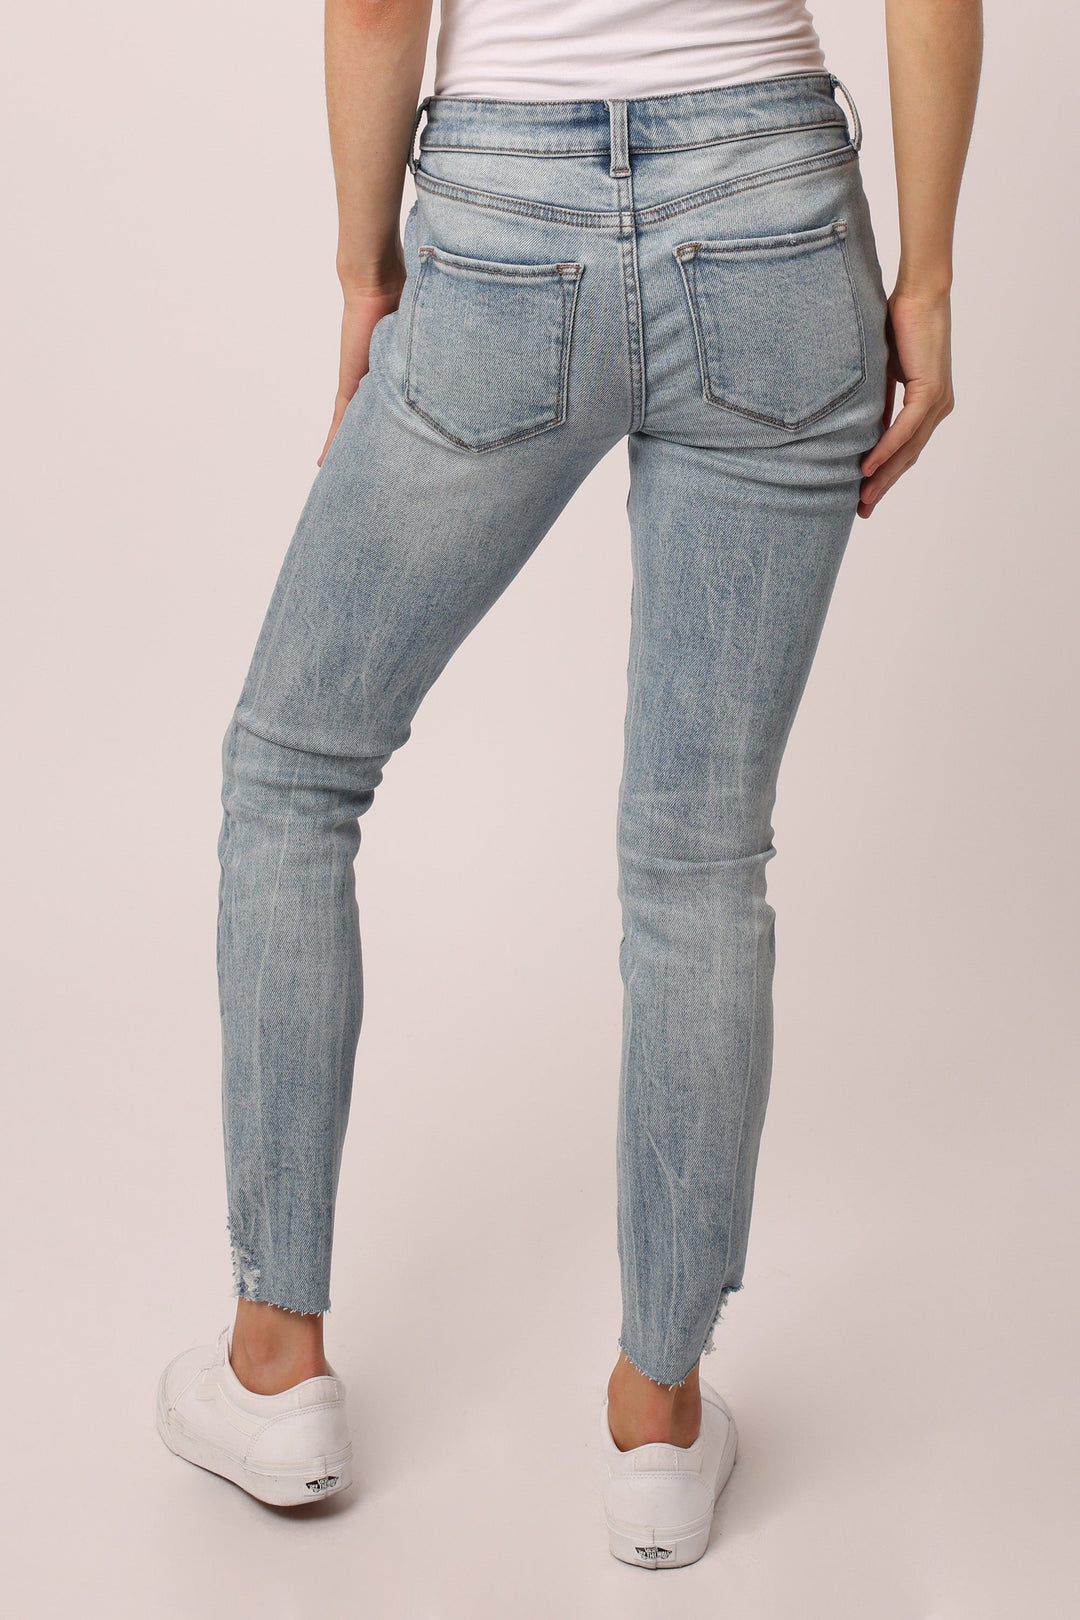 image of a female model wearing a JOYRICH MID RISE SKINNY JEANS ALAMOSA JEANS